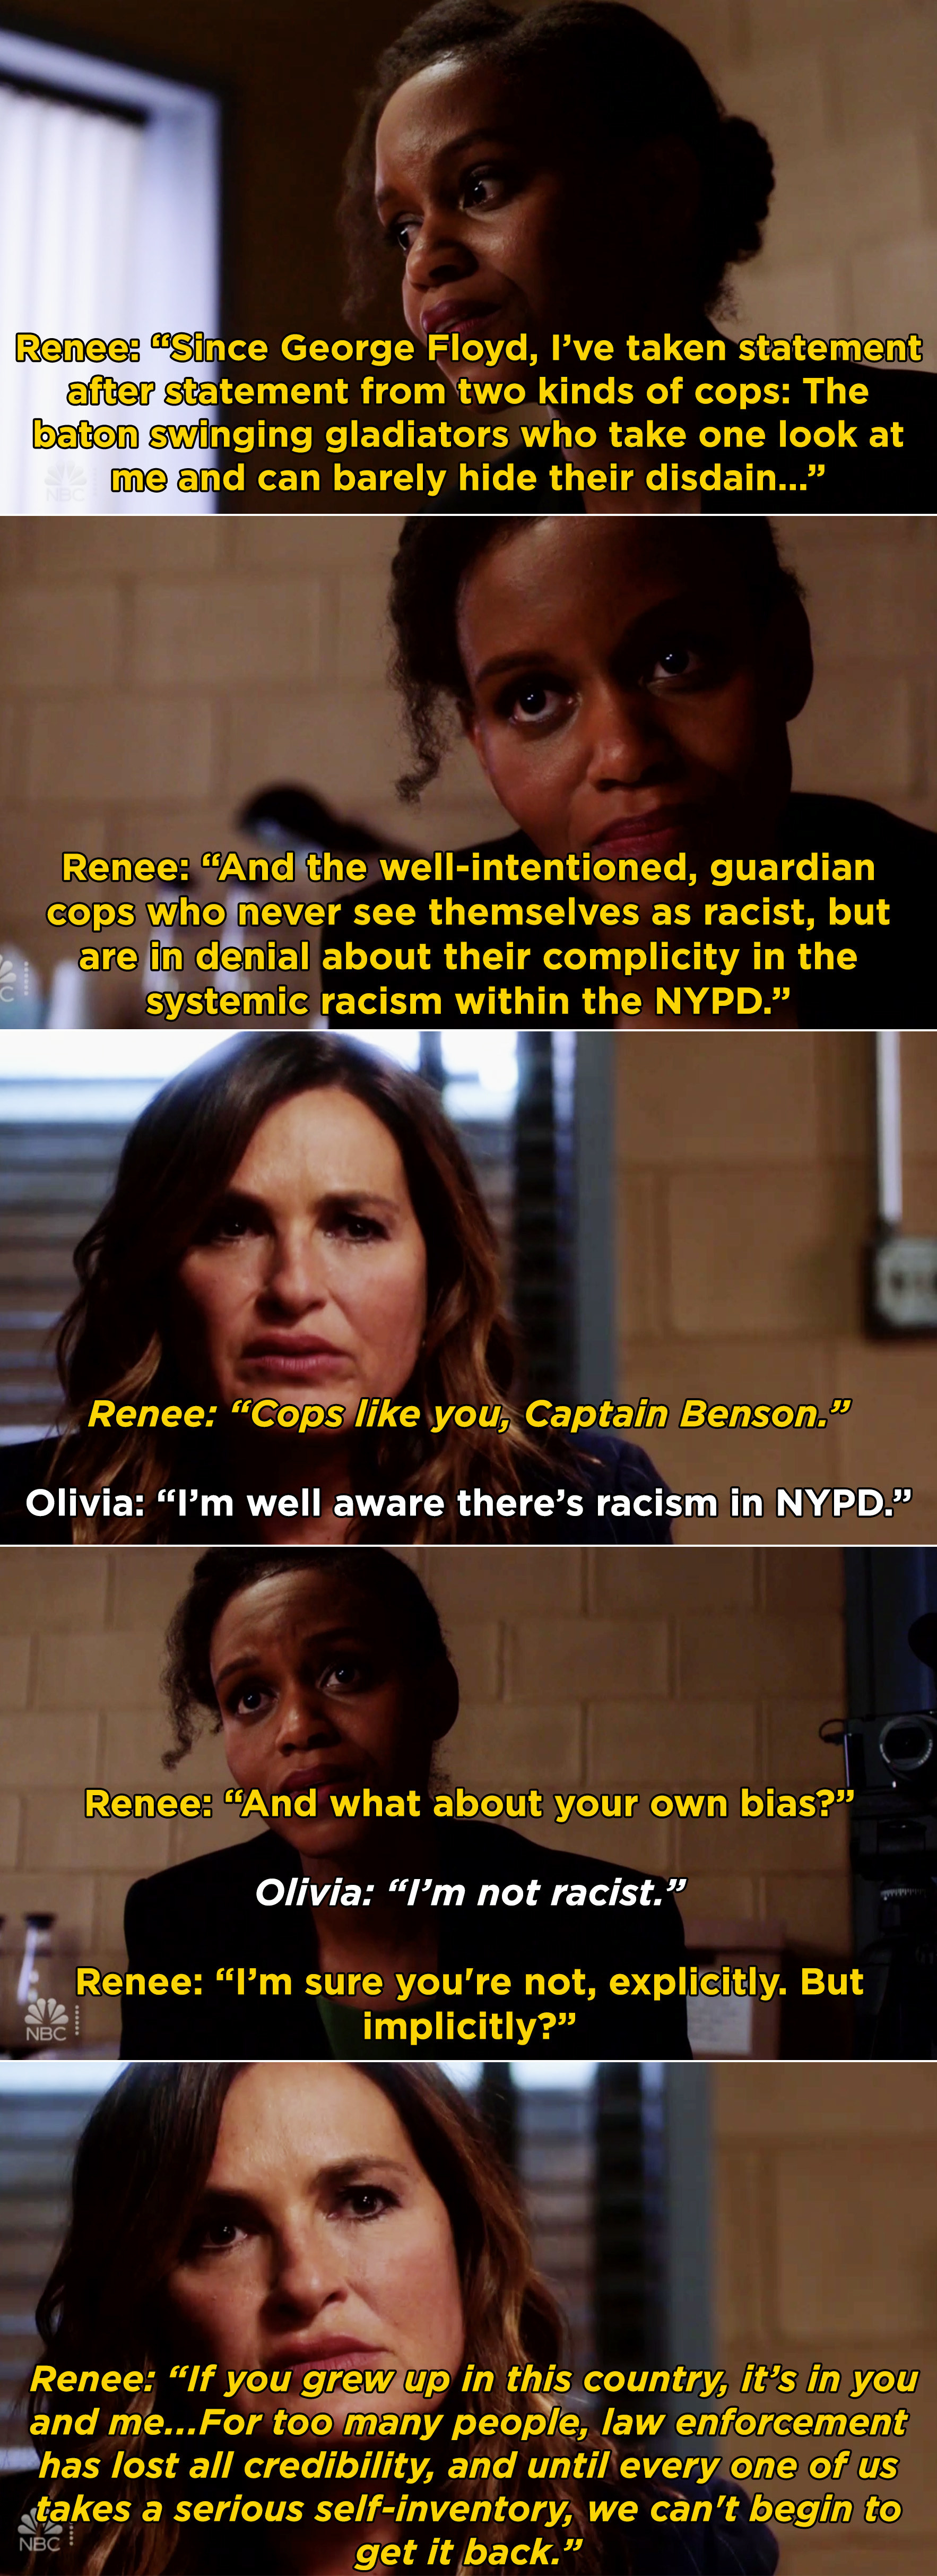 Renee telling Olivia that she needs to acknowledge her own implicit bias and work to change the NYPD 